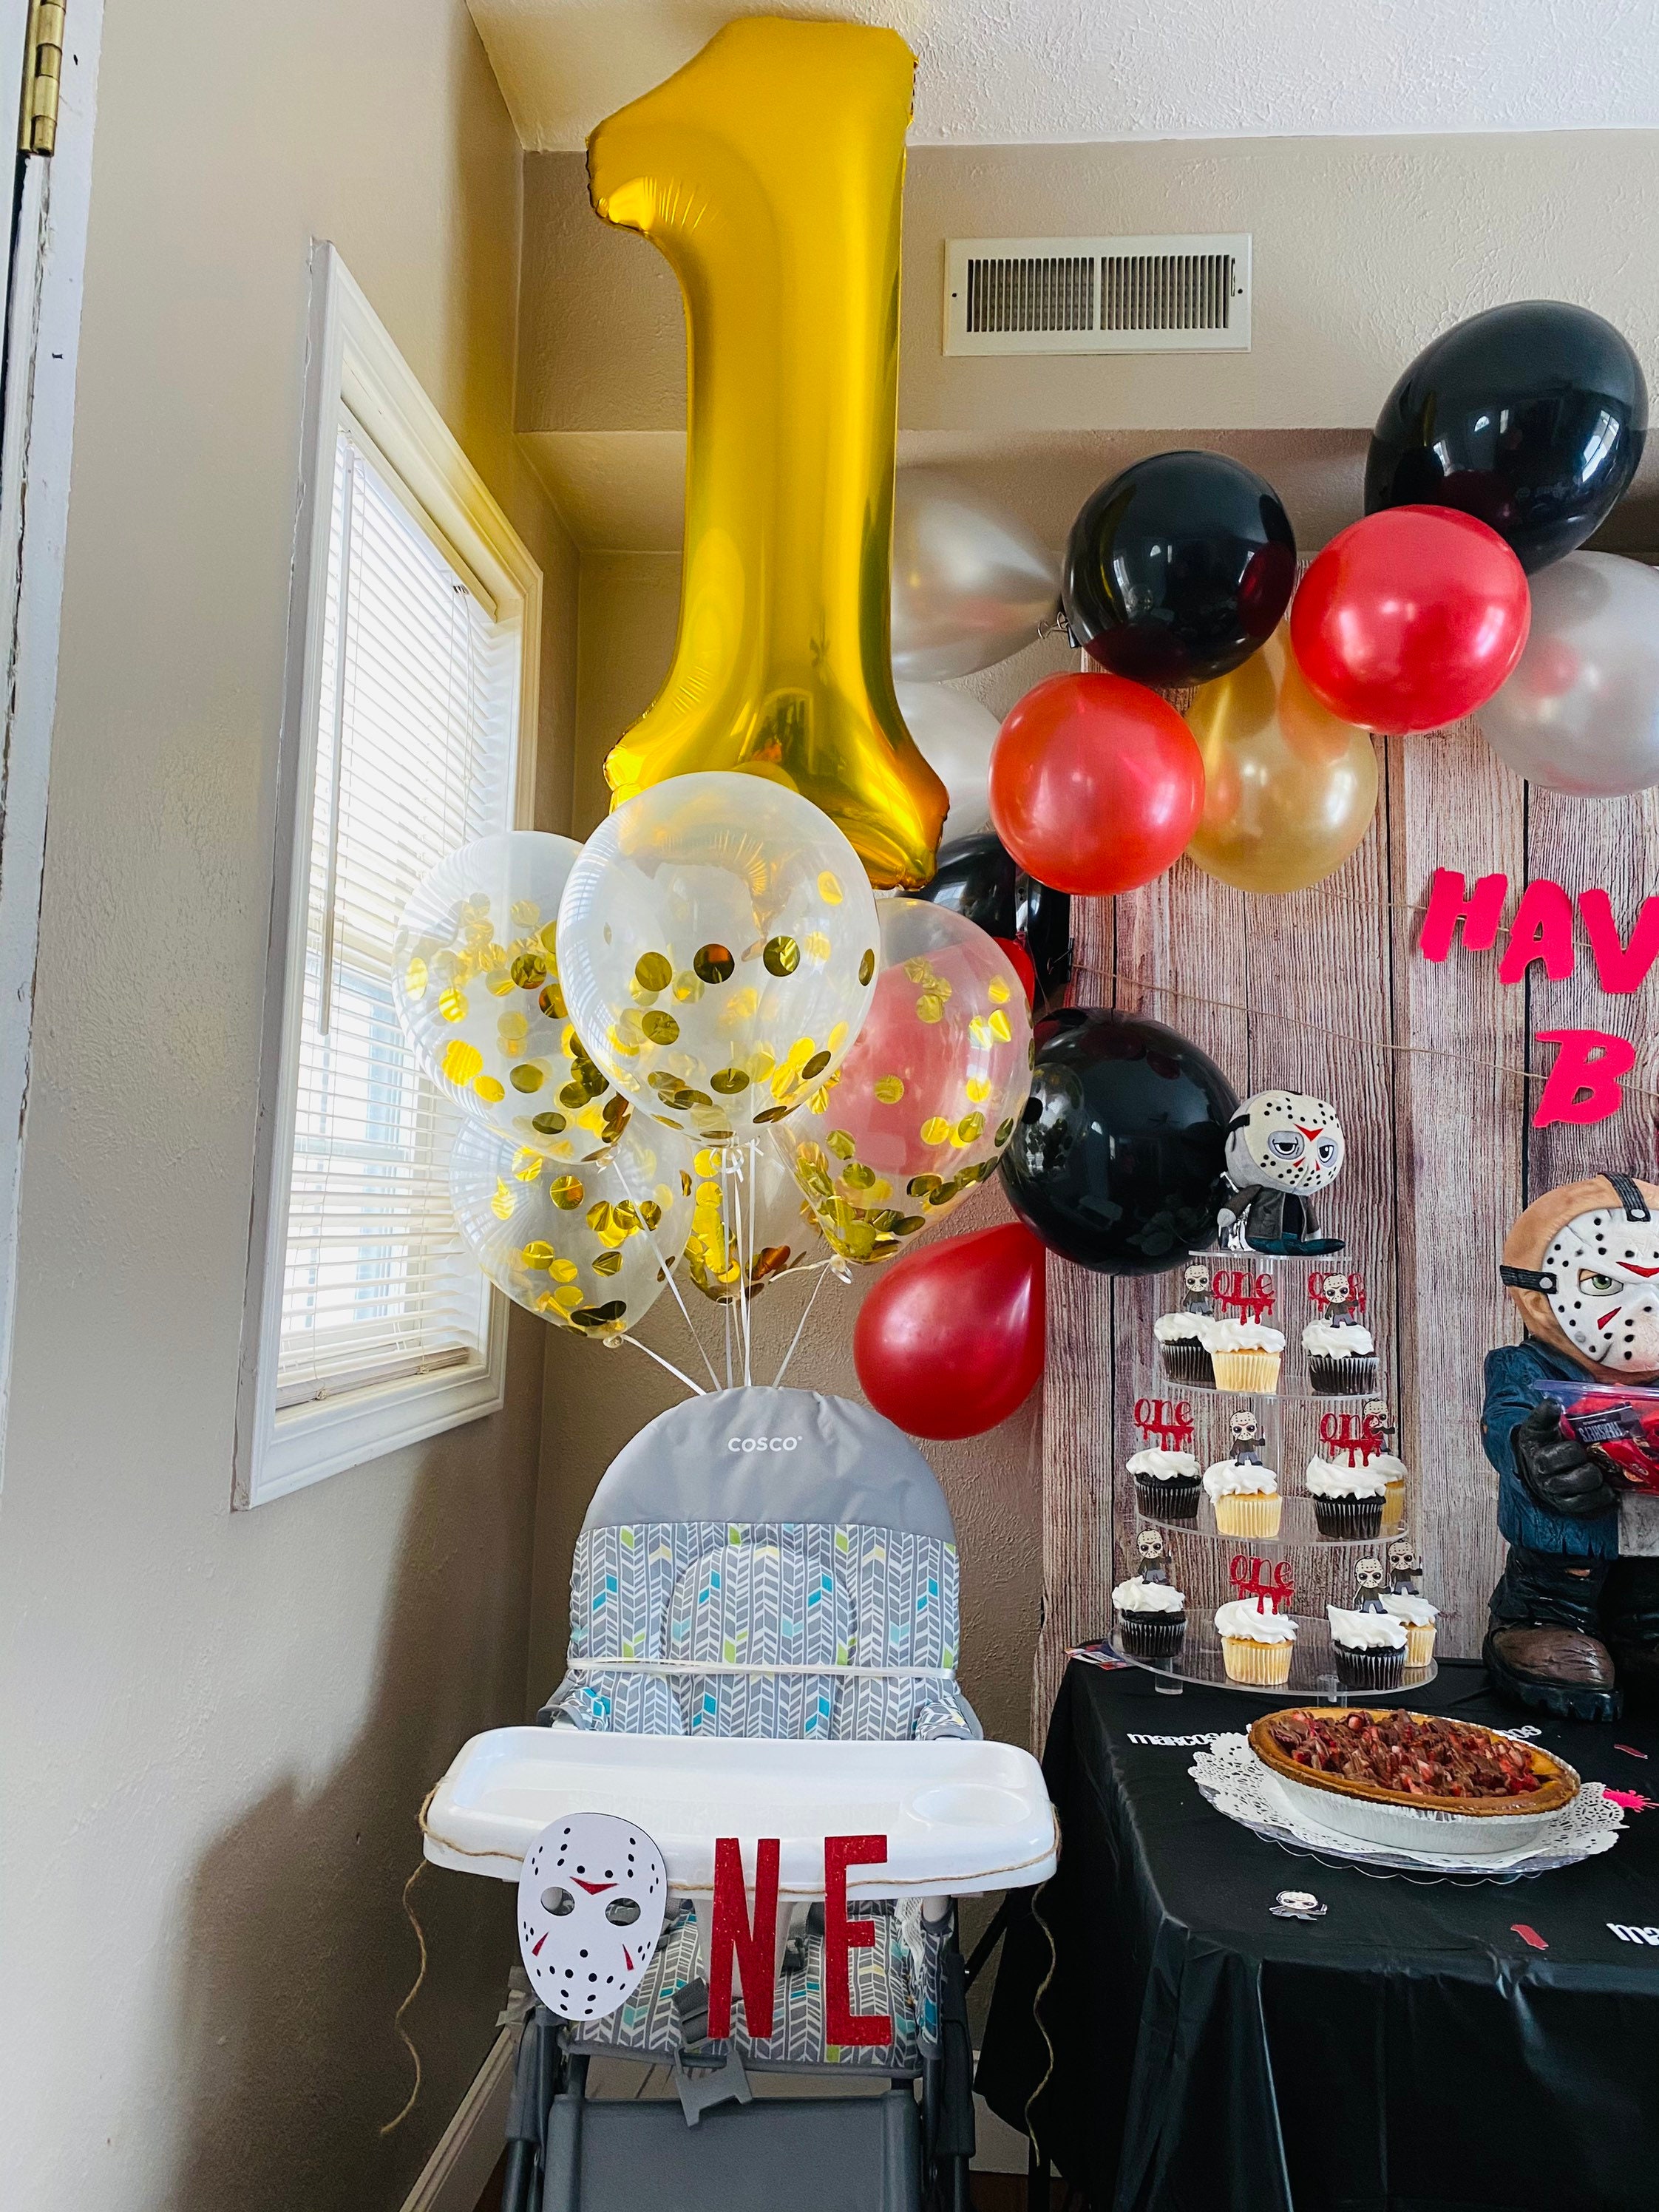 Friday the 13th Party Ideas for Birthday, Anniversary, & Just